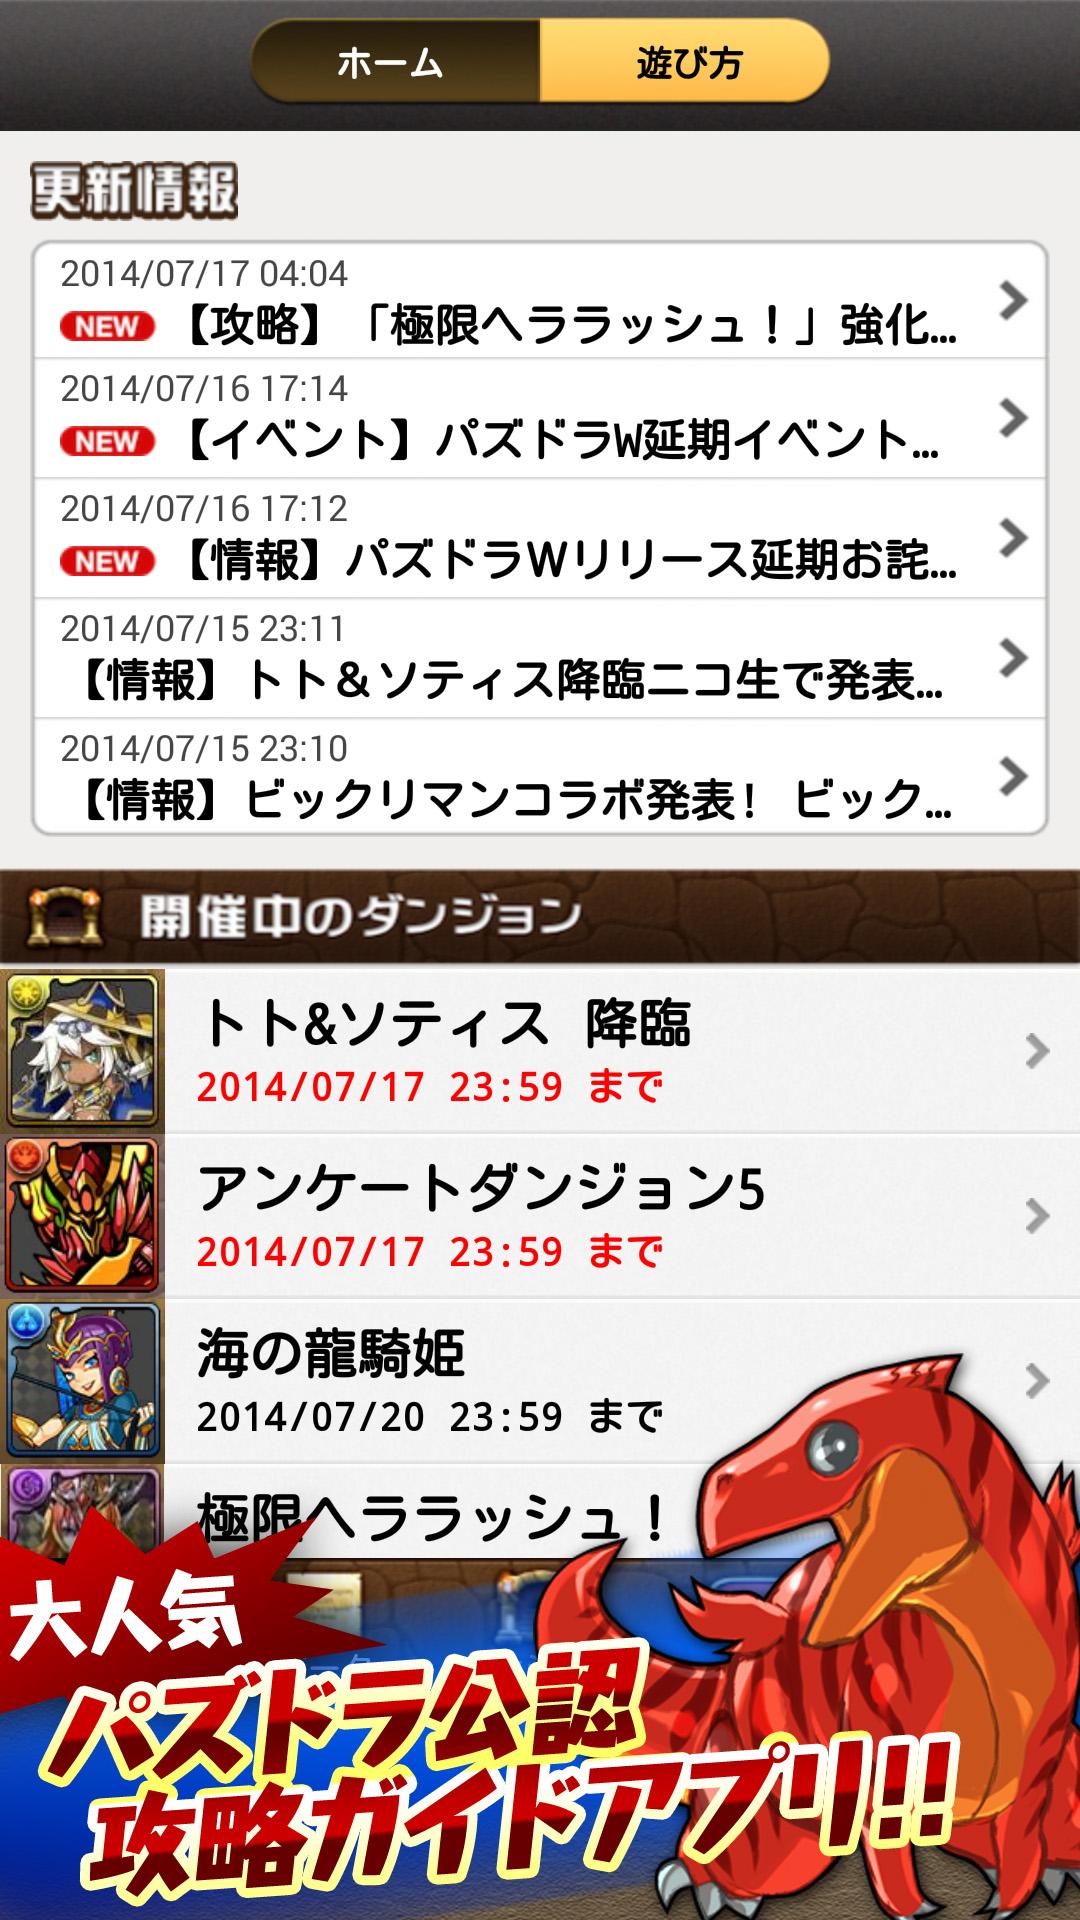 Android application Puzzle & Dragons User's Guide screenshort